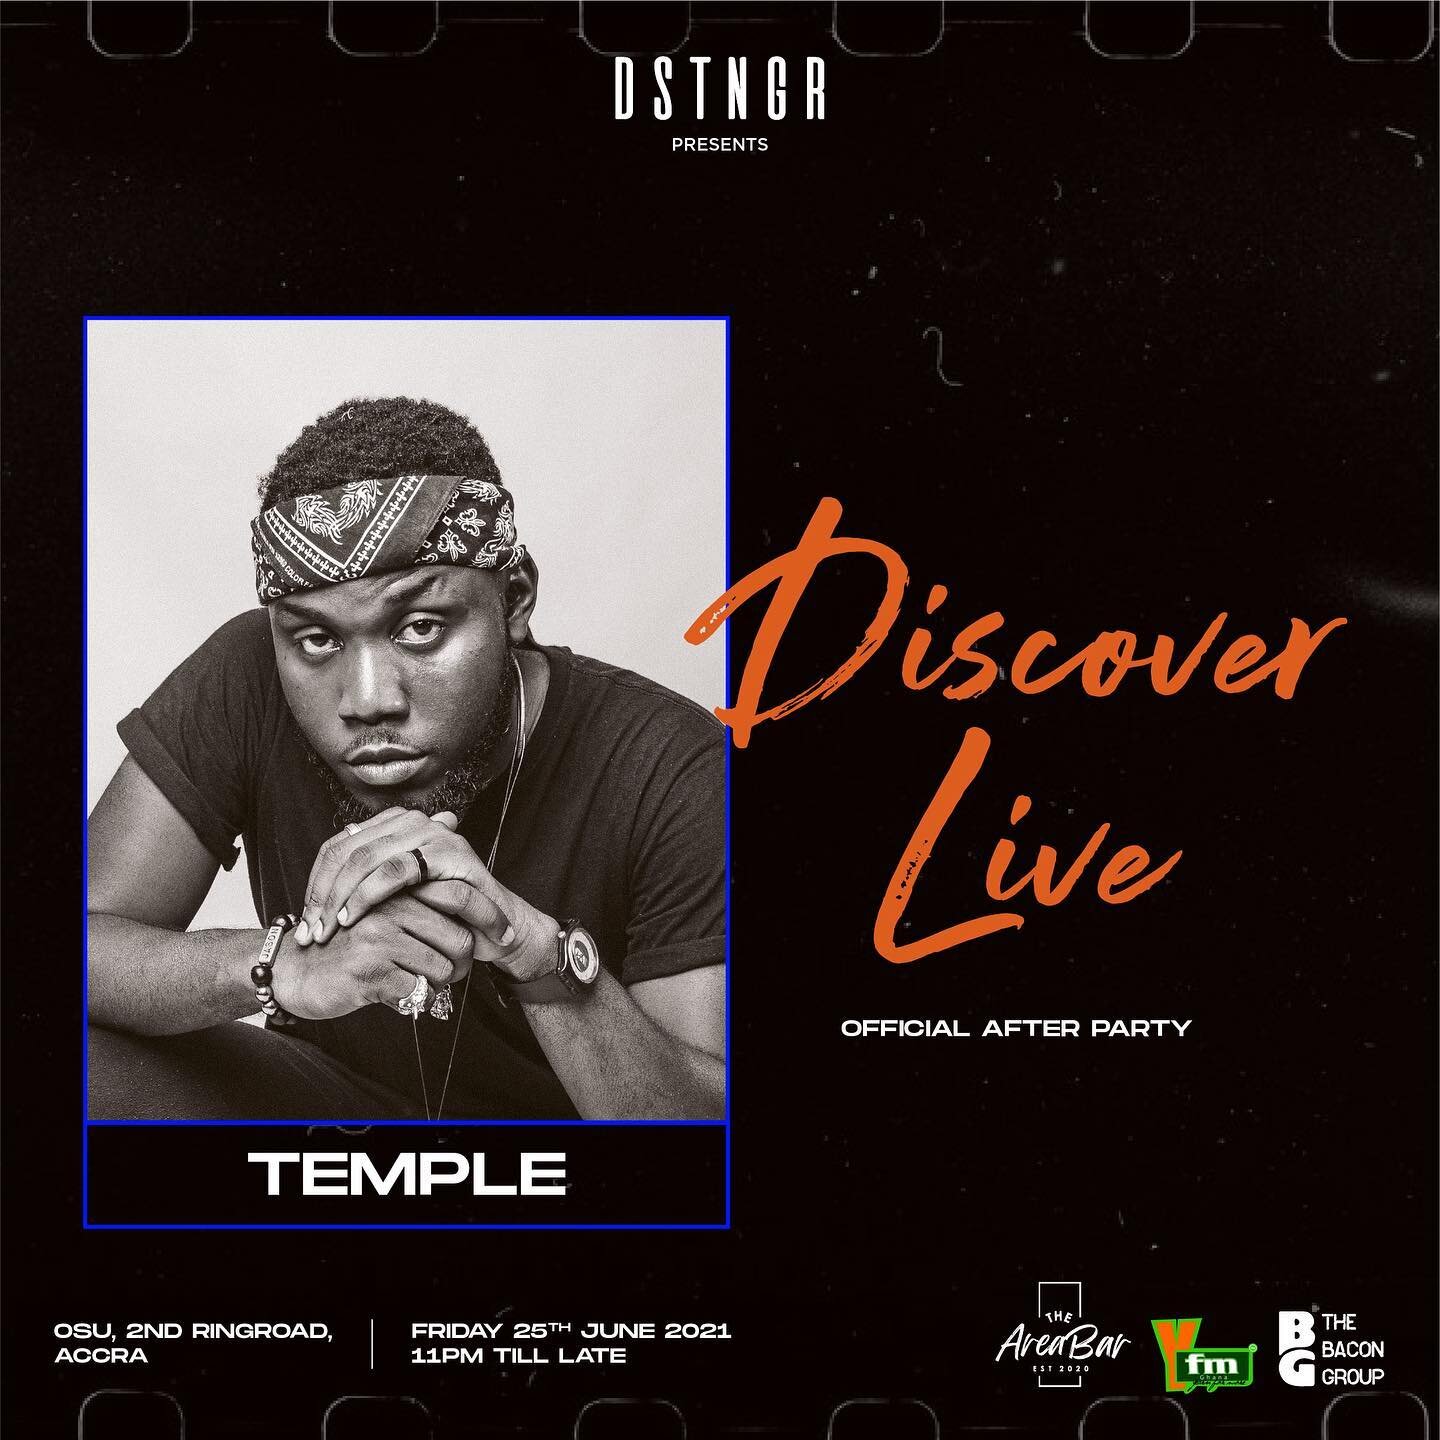 It&rsquo;s only a few moments until we kick things off with DISCOVER LIVE at @onecornergh. 

Doors open 7PM sharp and the sound checks be sounding wonderful! 

We also got heat on the After Party and our boi @templegramme will be shelling down the pl